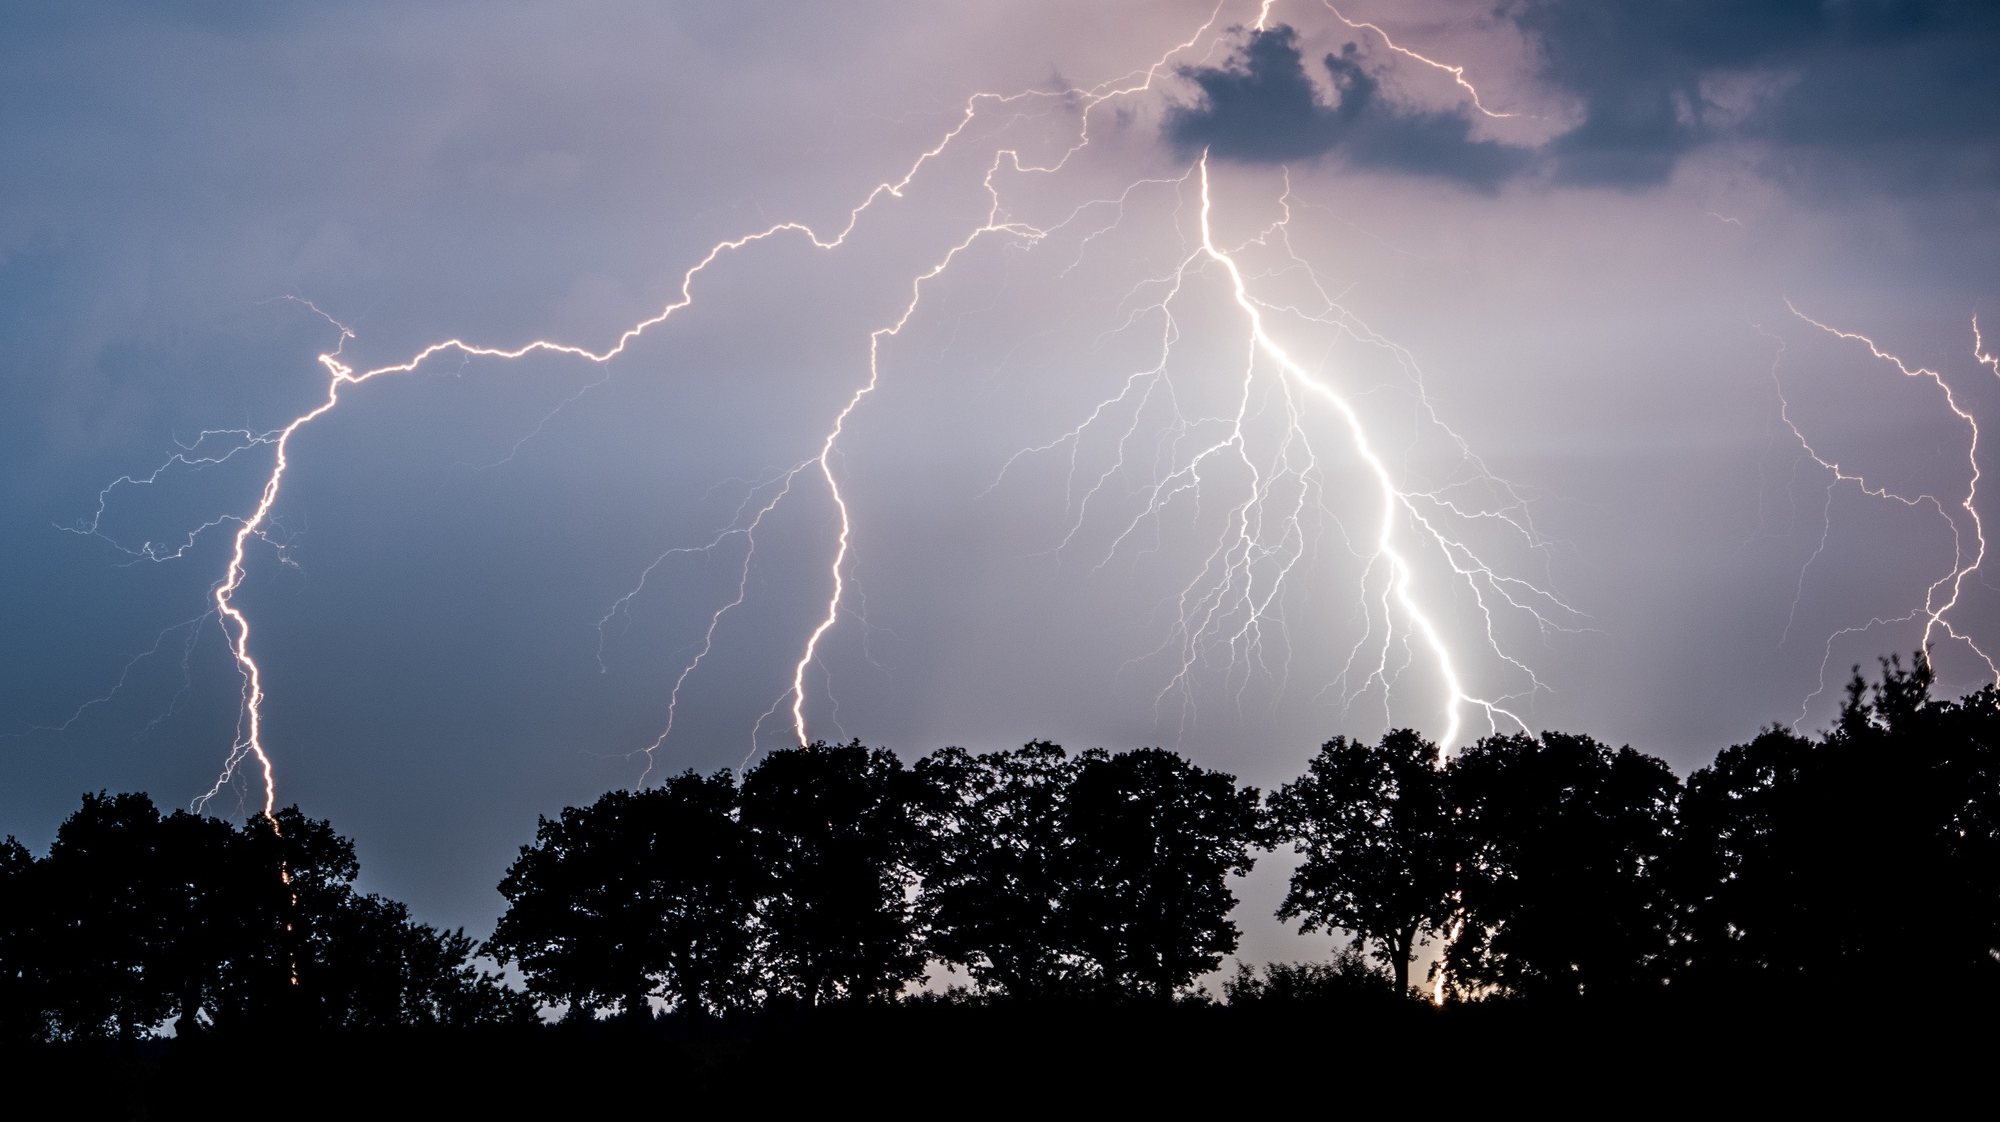 epa07655088 (FILE) Lightning illuminates the nigh sky over Landkreis Oder-Spree in Jacobsdorf, Brandenburg, Germany 01 September 2015 (issued 18 June 2019). German forecasters have issued severe weather warnings for the Corpus Christi bank holiday 20 June 2019 with heavy thunderstorms expected across the country.  EPA/PATRICK PLEUL *** Local Caption *** 52174756